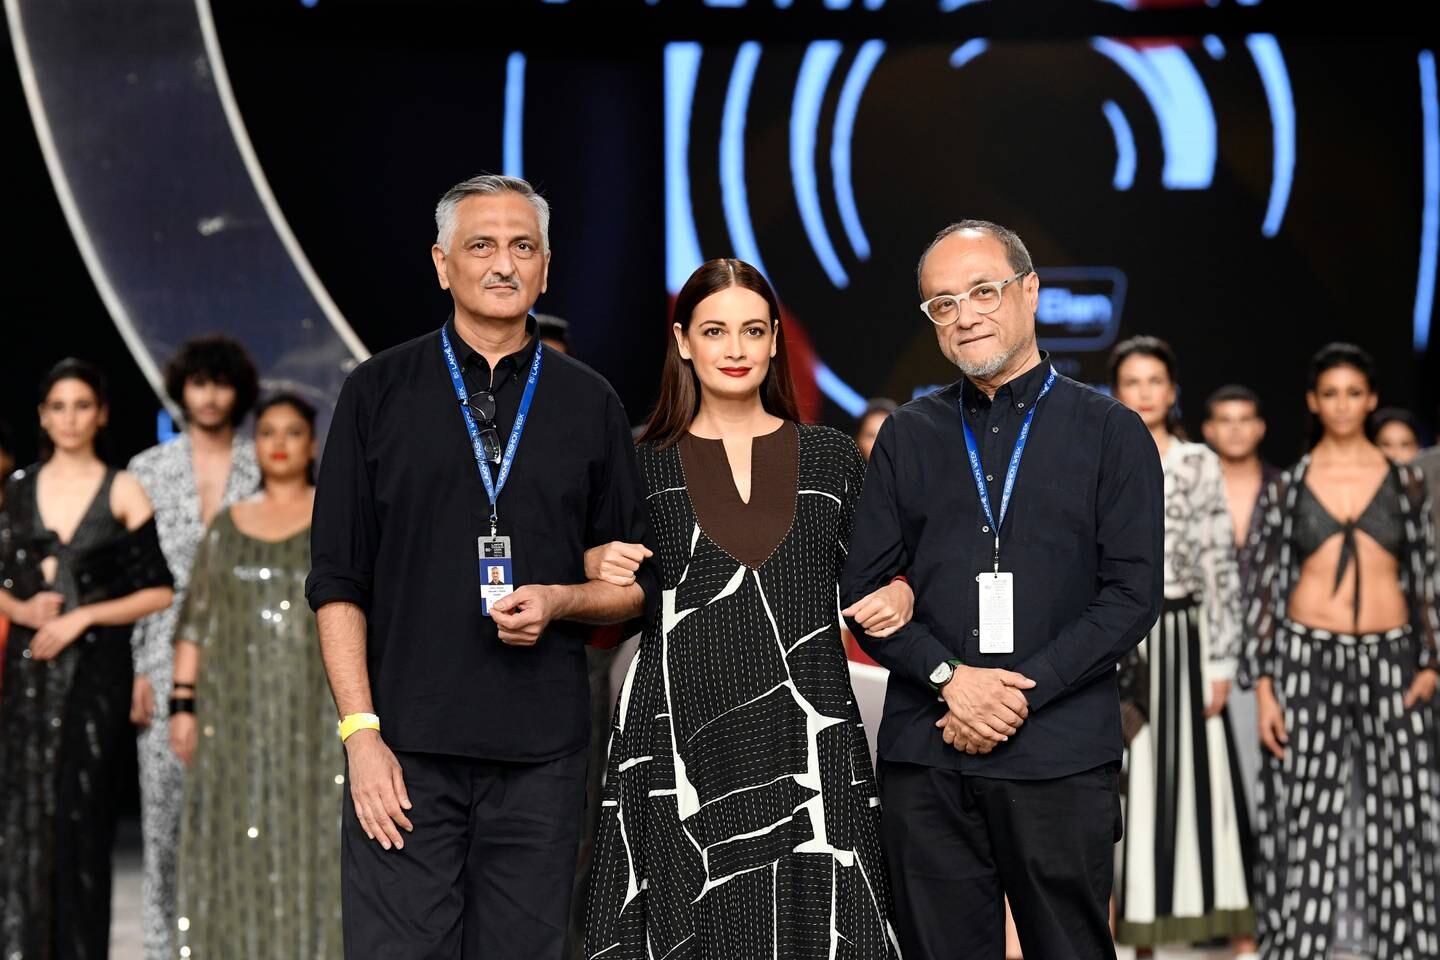 Model Dia Mizra is flanked by Rakesh Thakore (left) and David Abraham (right) during the Abraham & Thakore show at FDCI x Lakmé Fashion Week 2021.